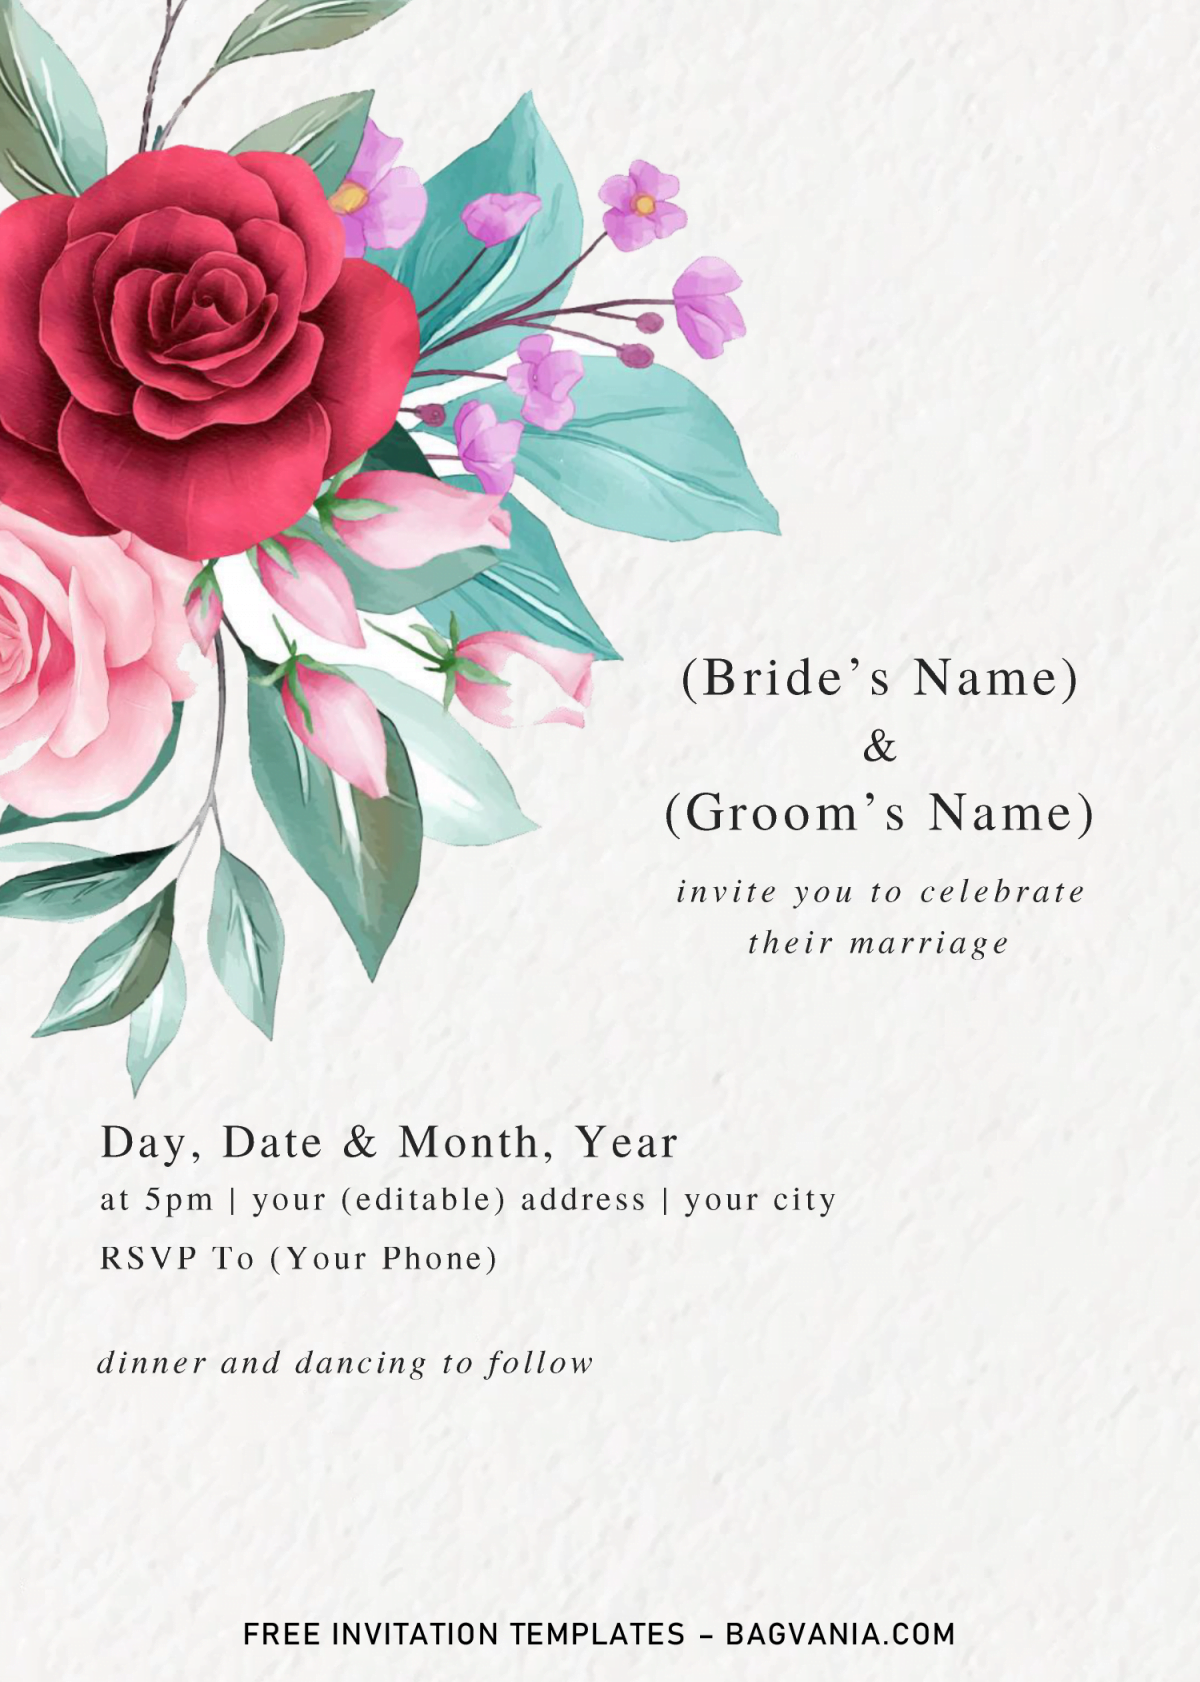 Floral And Greenery Invitation Templates - Editable With Microsoft Word and has red roses